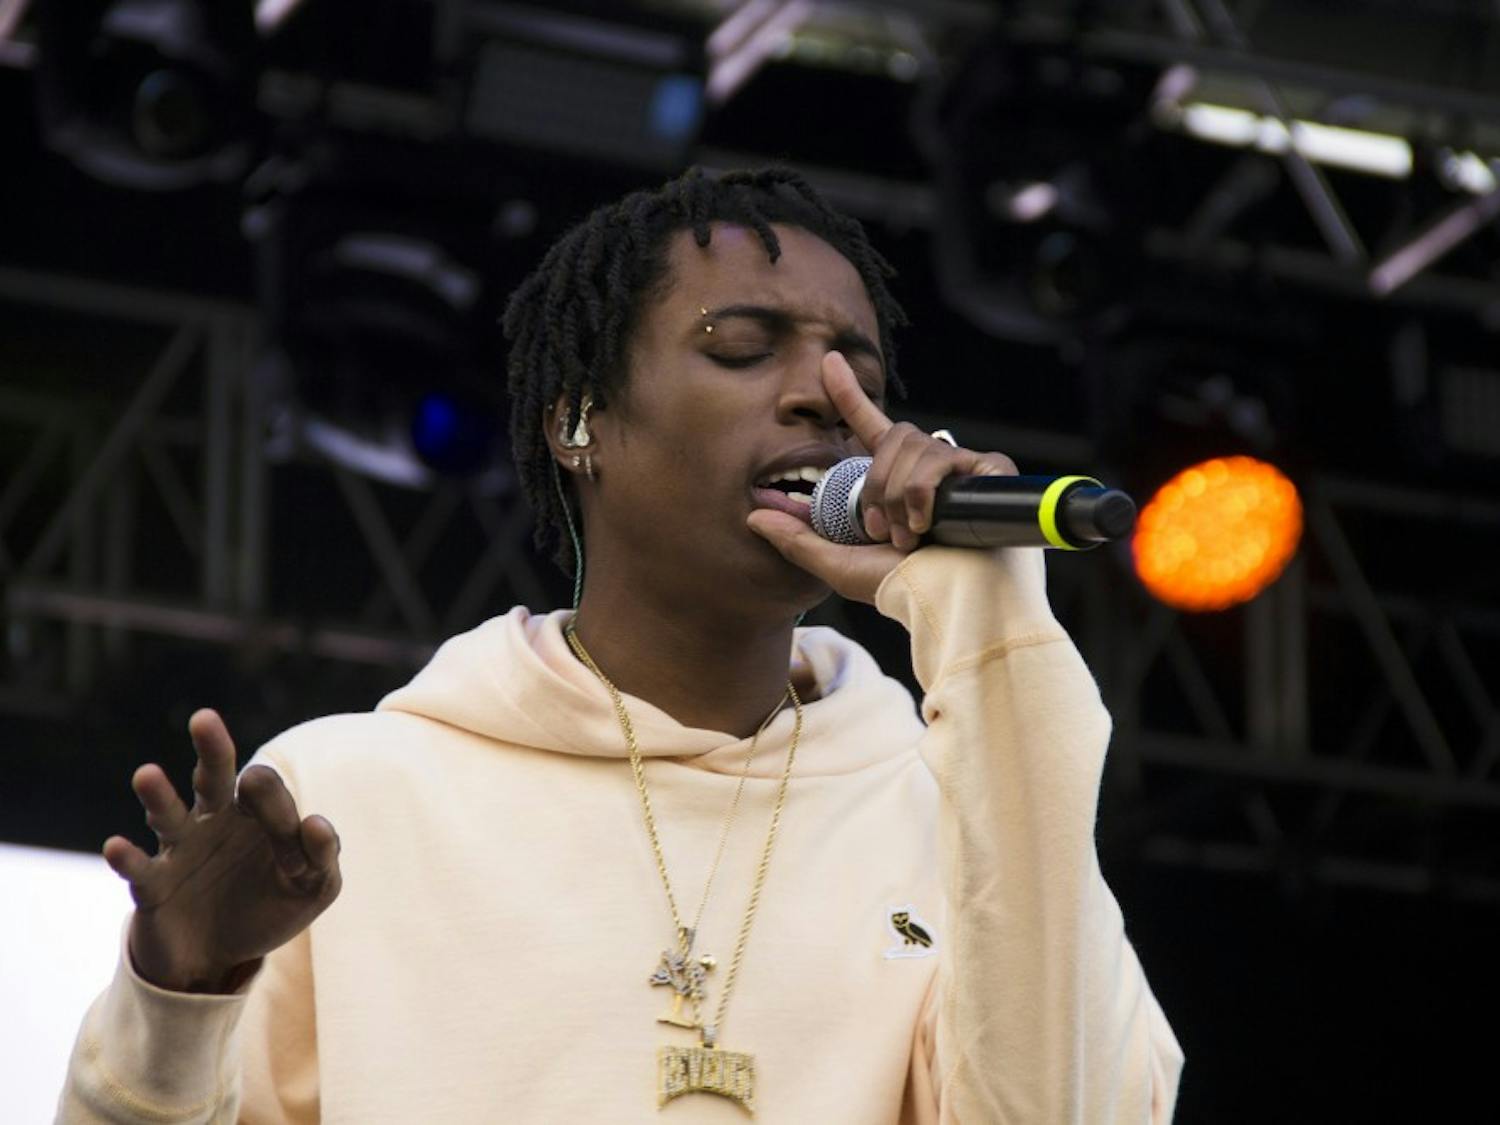 UB's annual Fall Fest brought acts such as Roy Woods, Blackbear, New Politics and Lil Uzi Vert to Baird Point on Saturday night.